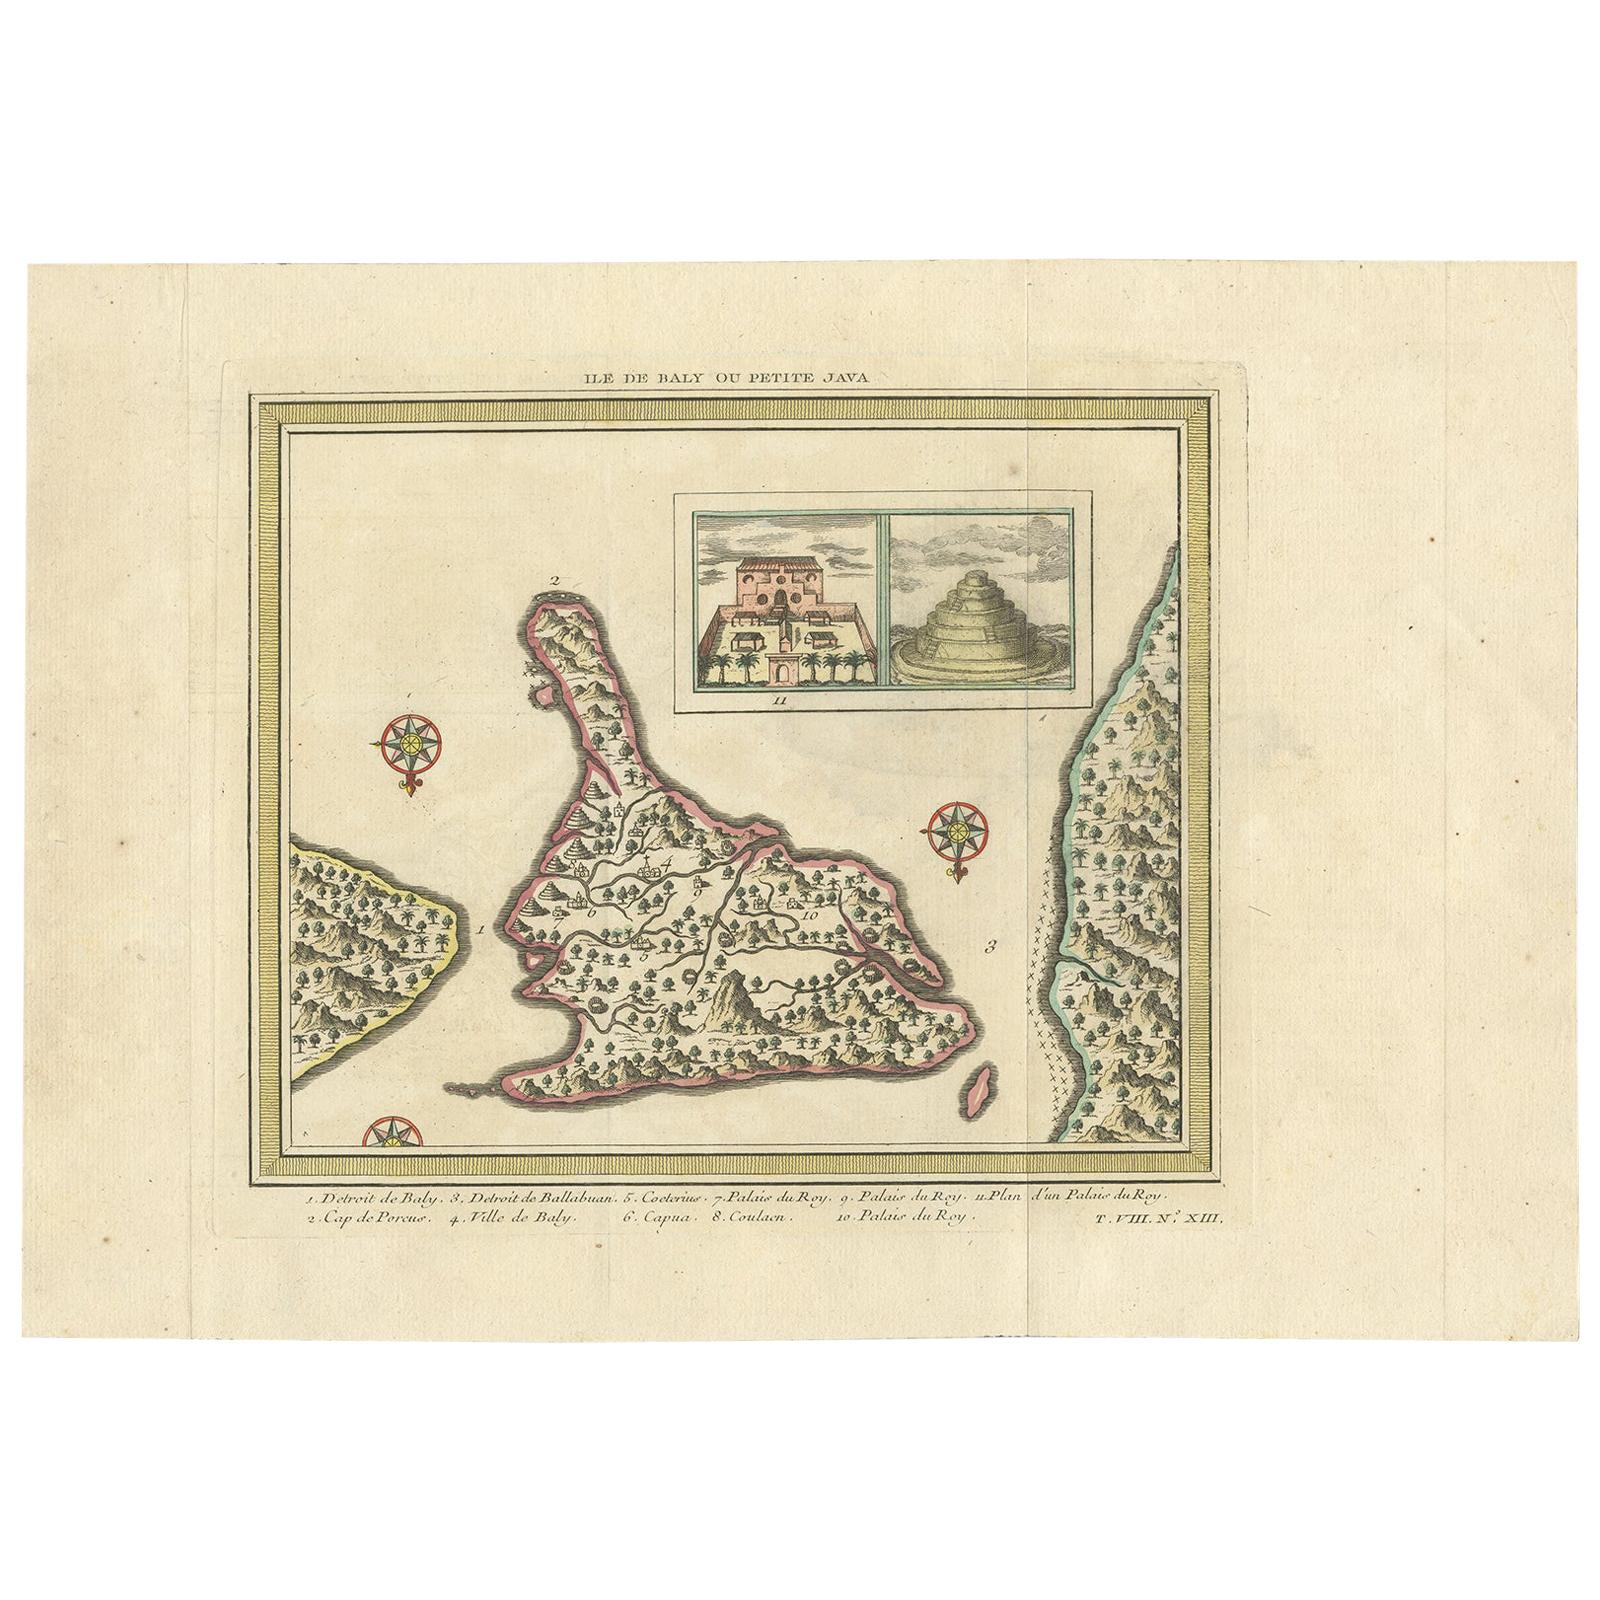 Antique Map of Bali 'Indonesia' by Bellin '1757'